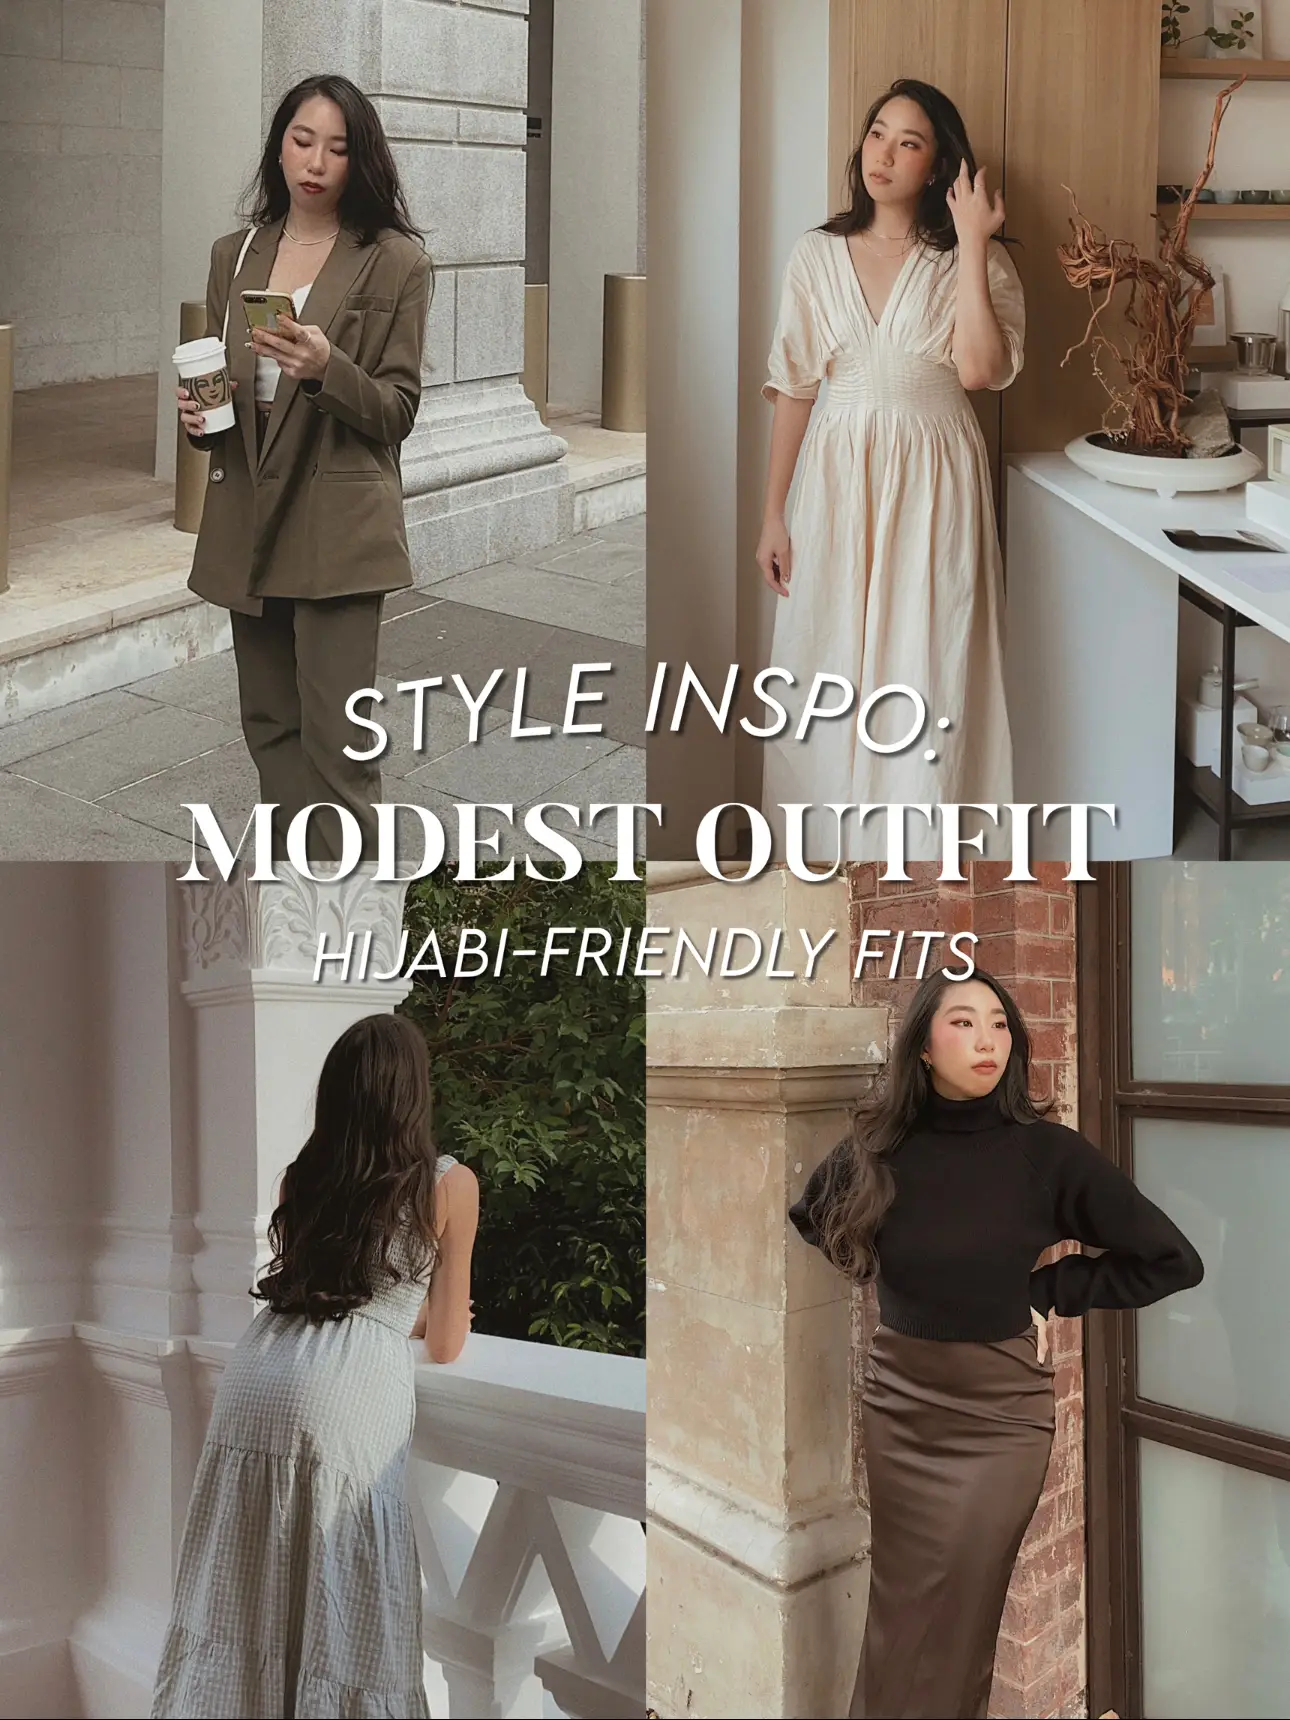 Shein finds modesty +hijabi addition✨, Gallery posted by Malaika